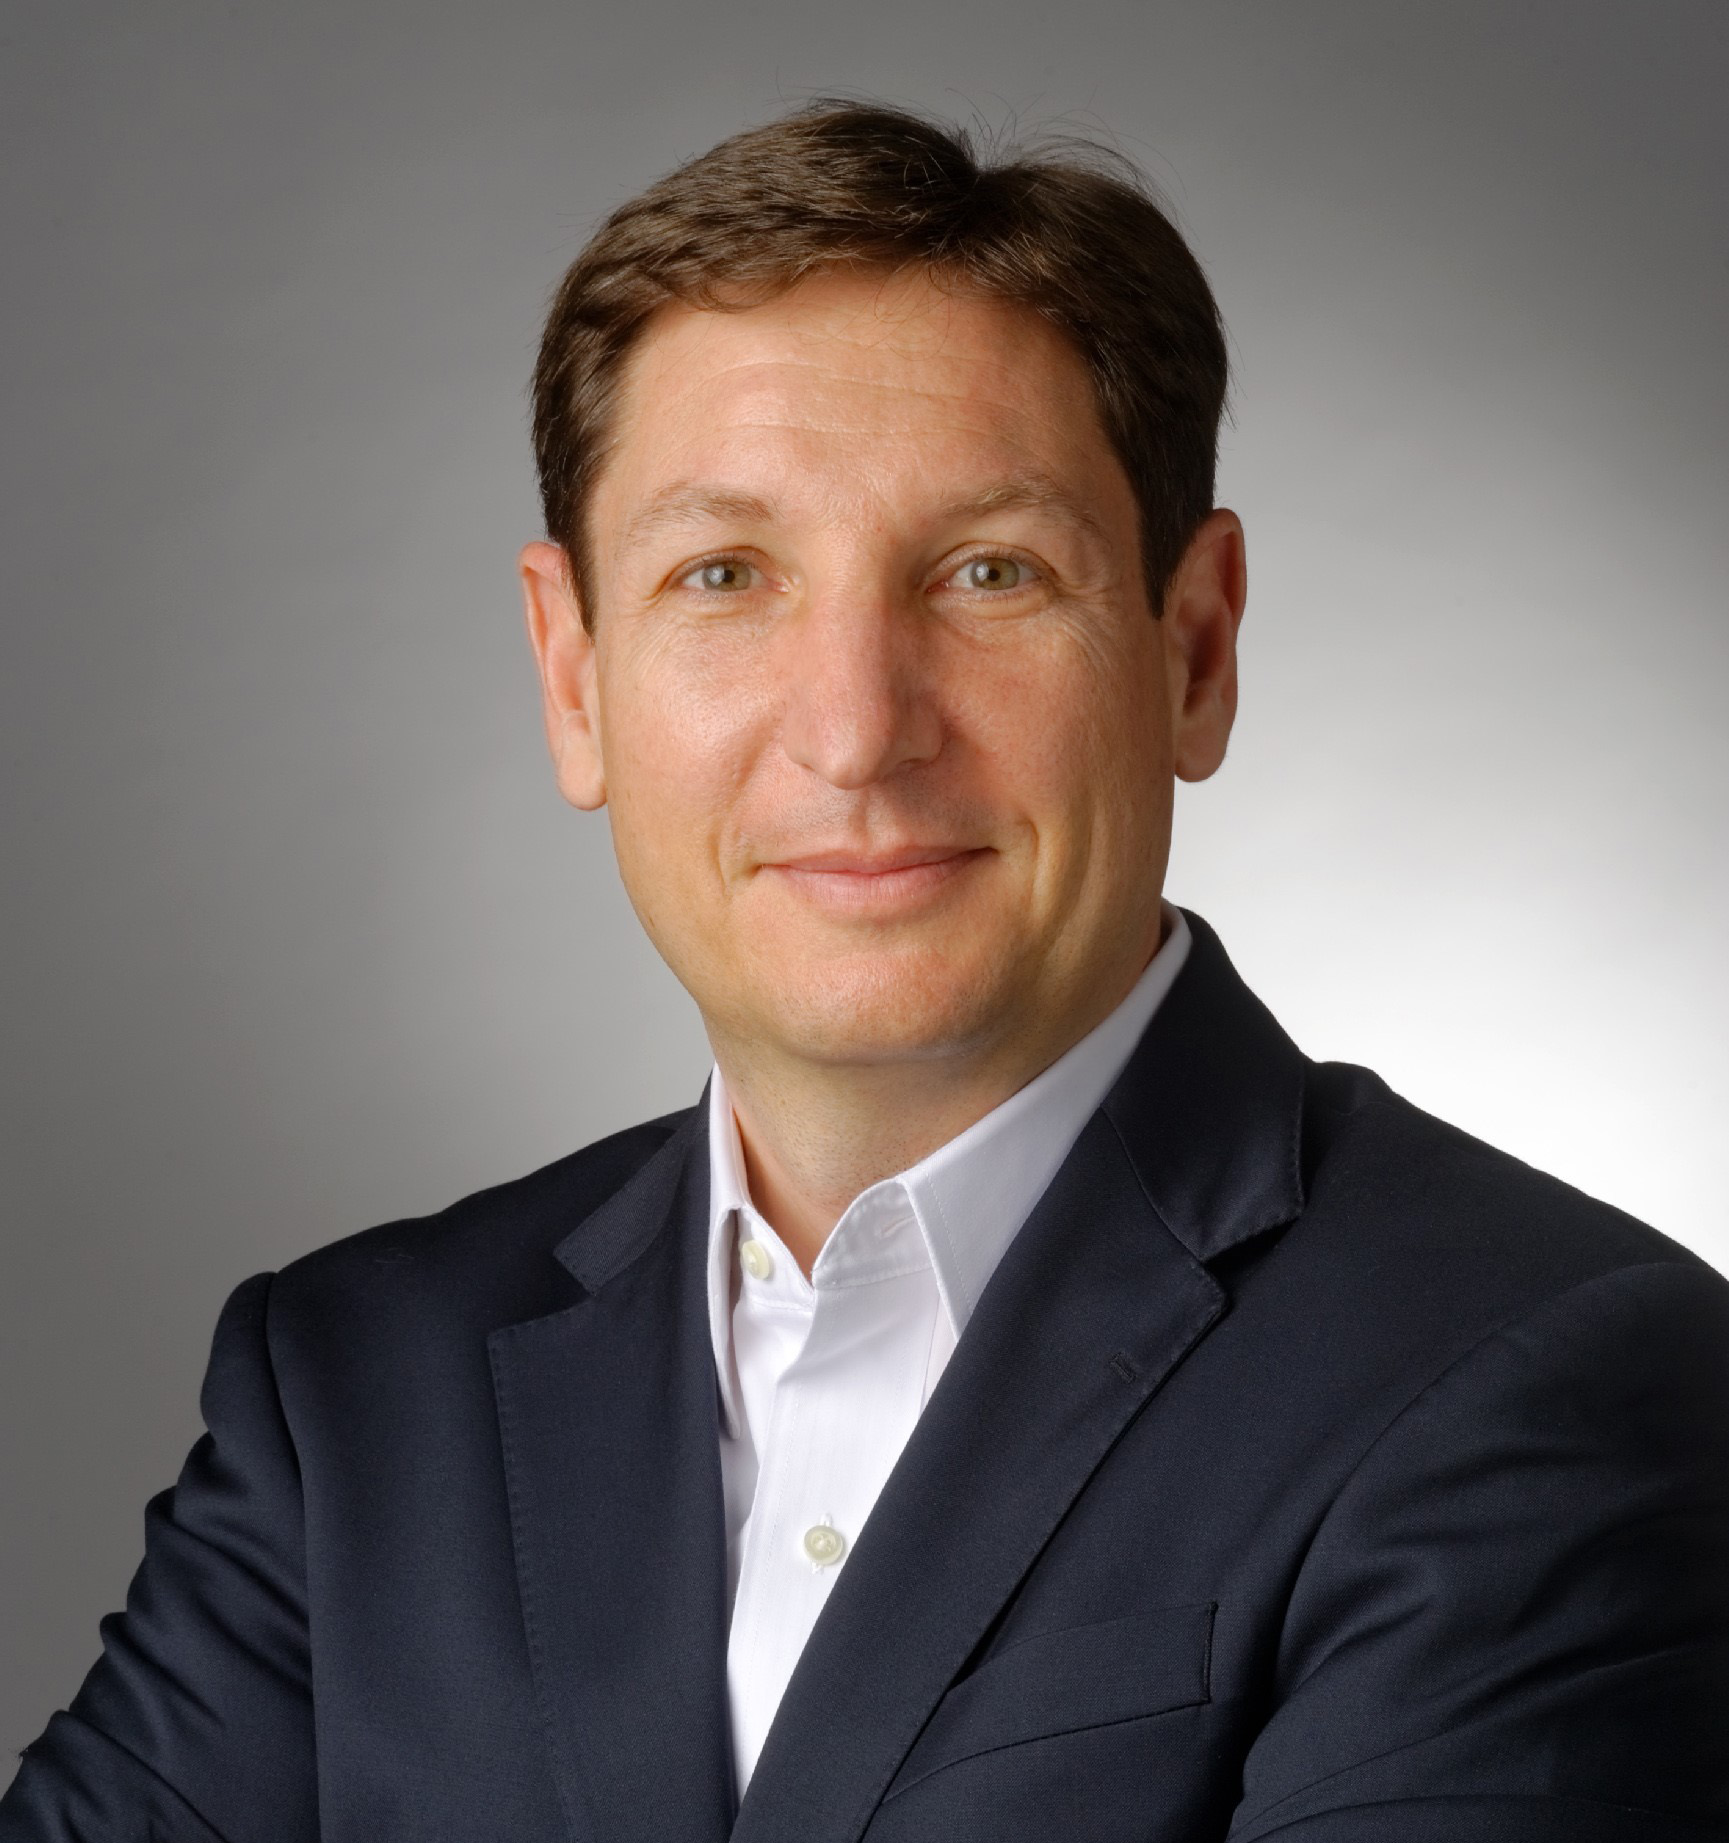 Thomas Strauch Joins Hilco Vision as Group CFO